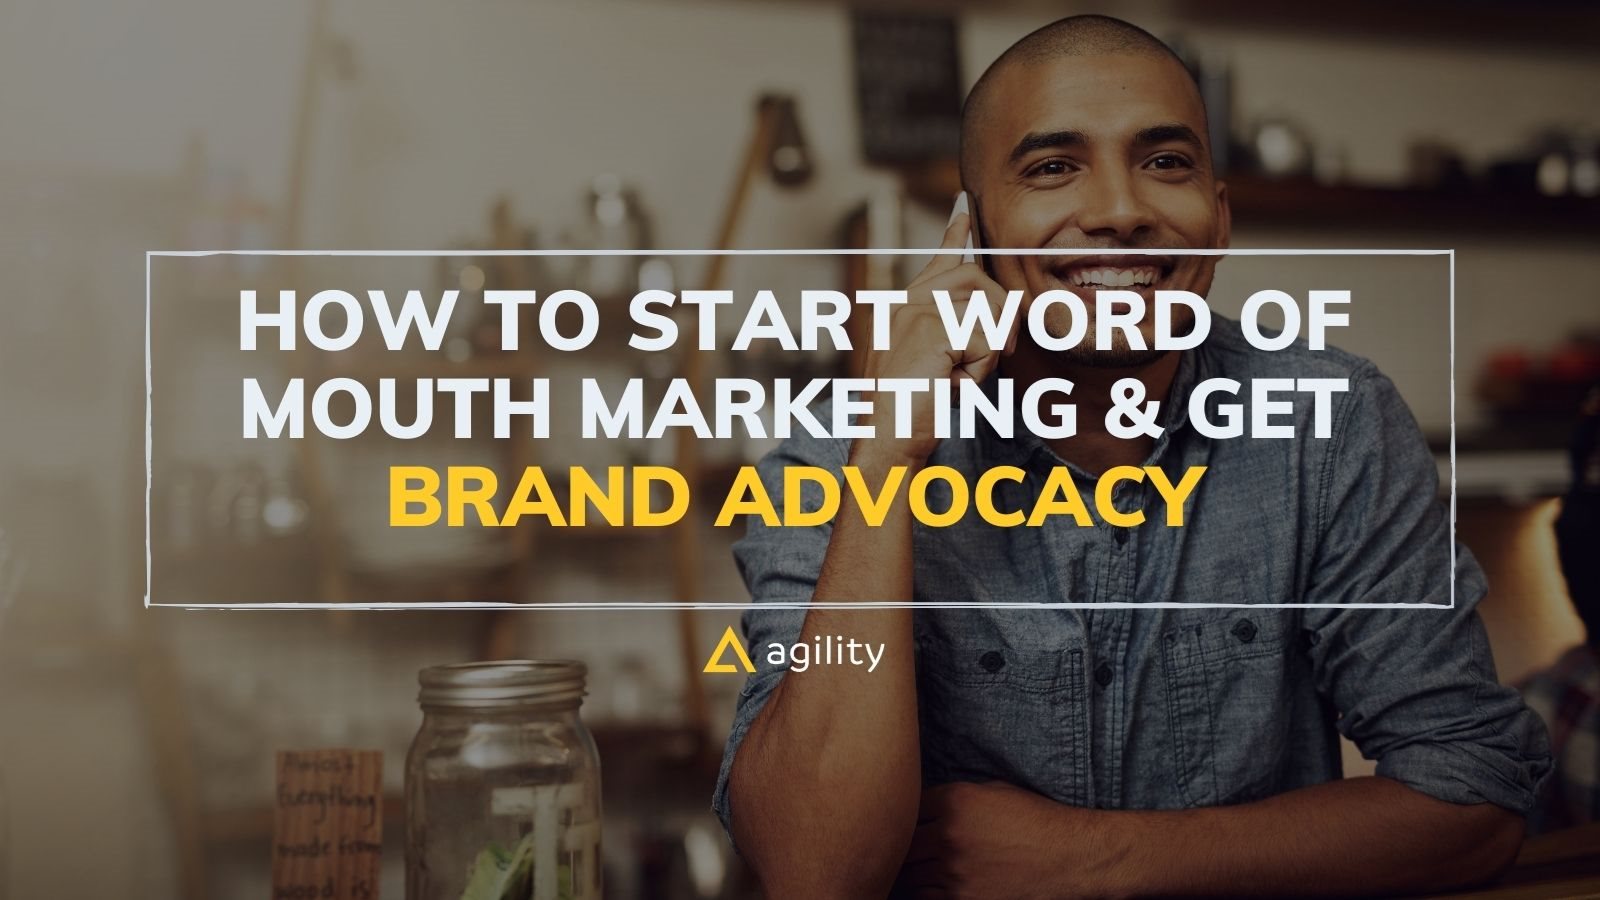 How to Start Word of Mouth Marketing & Get Brand Advocacy